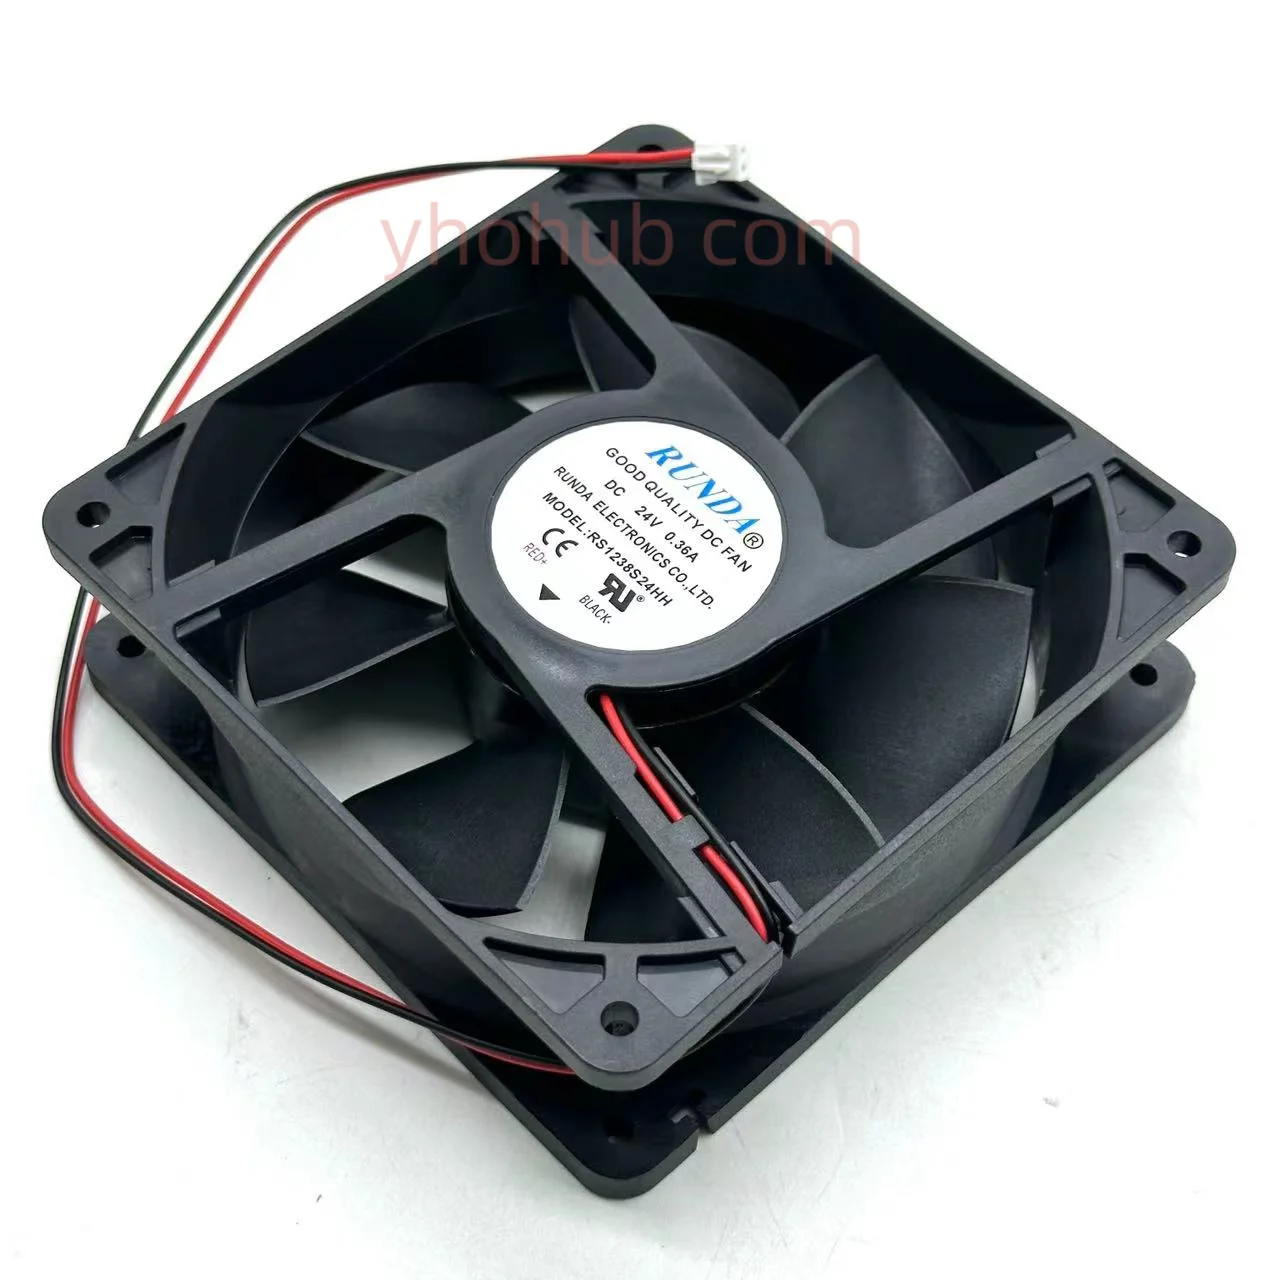 

RUNDA RS1238S24HH DC 24V 0.36A 120x120x38mm 2-Wire Server Cooling Fan